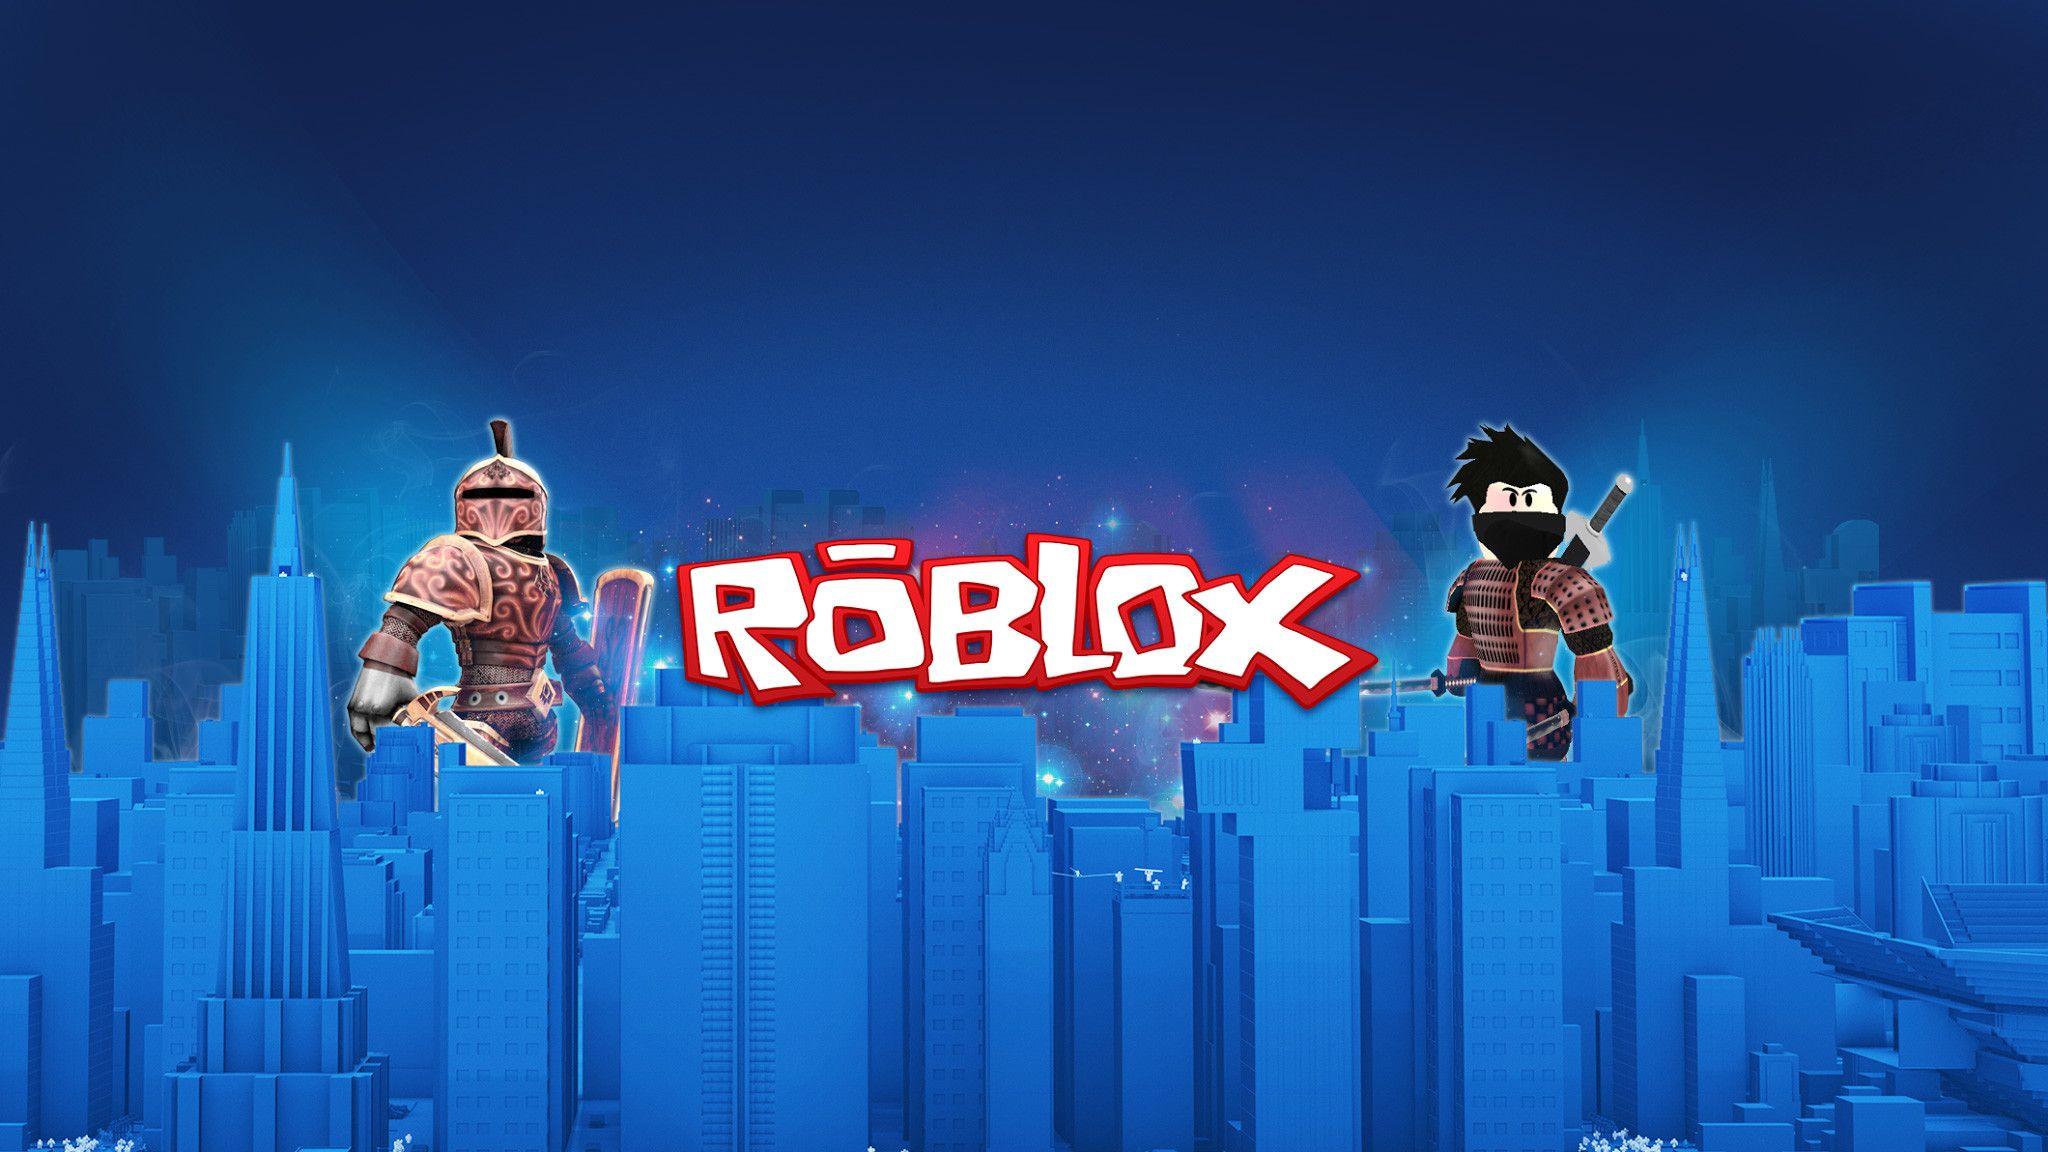 Cute Roblox Wallpapers Top Free Cute Roblox Backgrounds Wallpaperaccess - cute username wallpaper for roblox